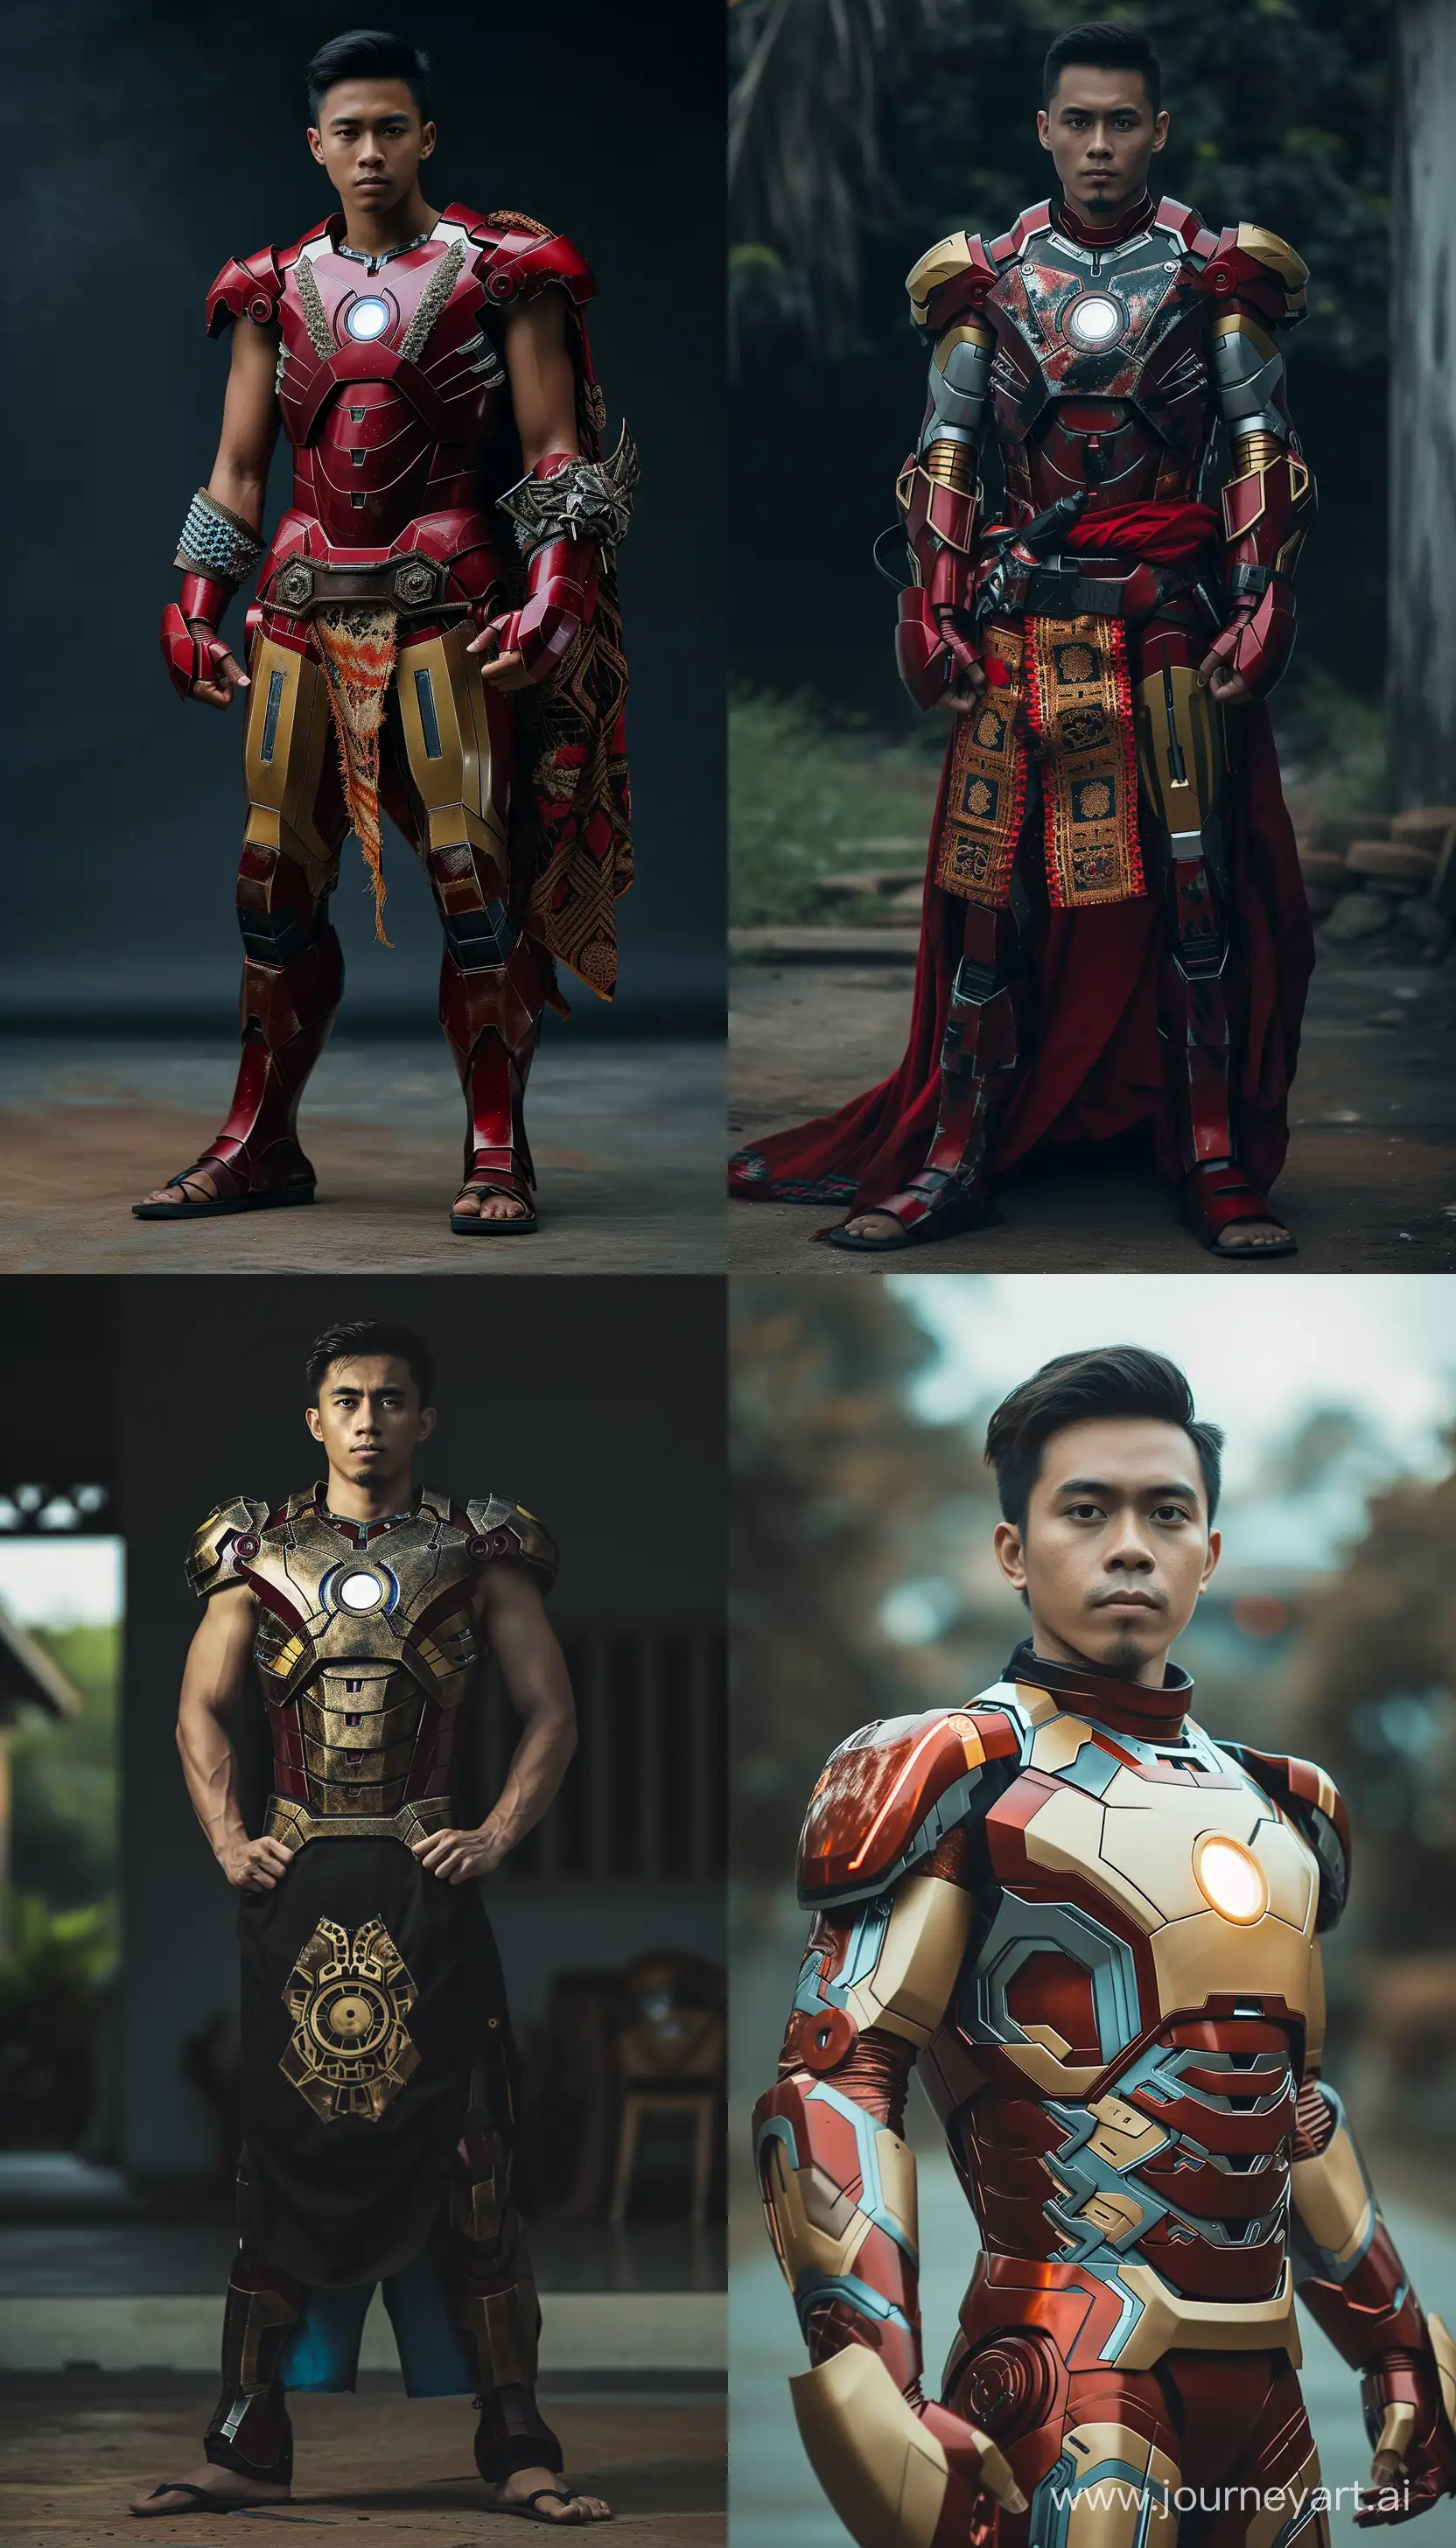 Handsome-Indonesian-Man-in-Blangkon-and-Iron-Man-Armor-at-Alunalun-Tegal